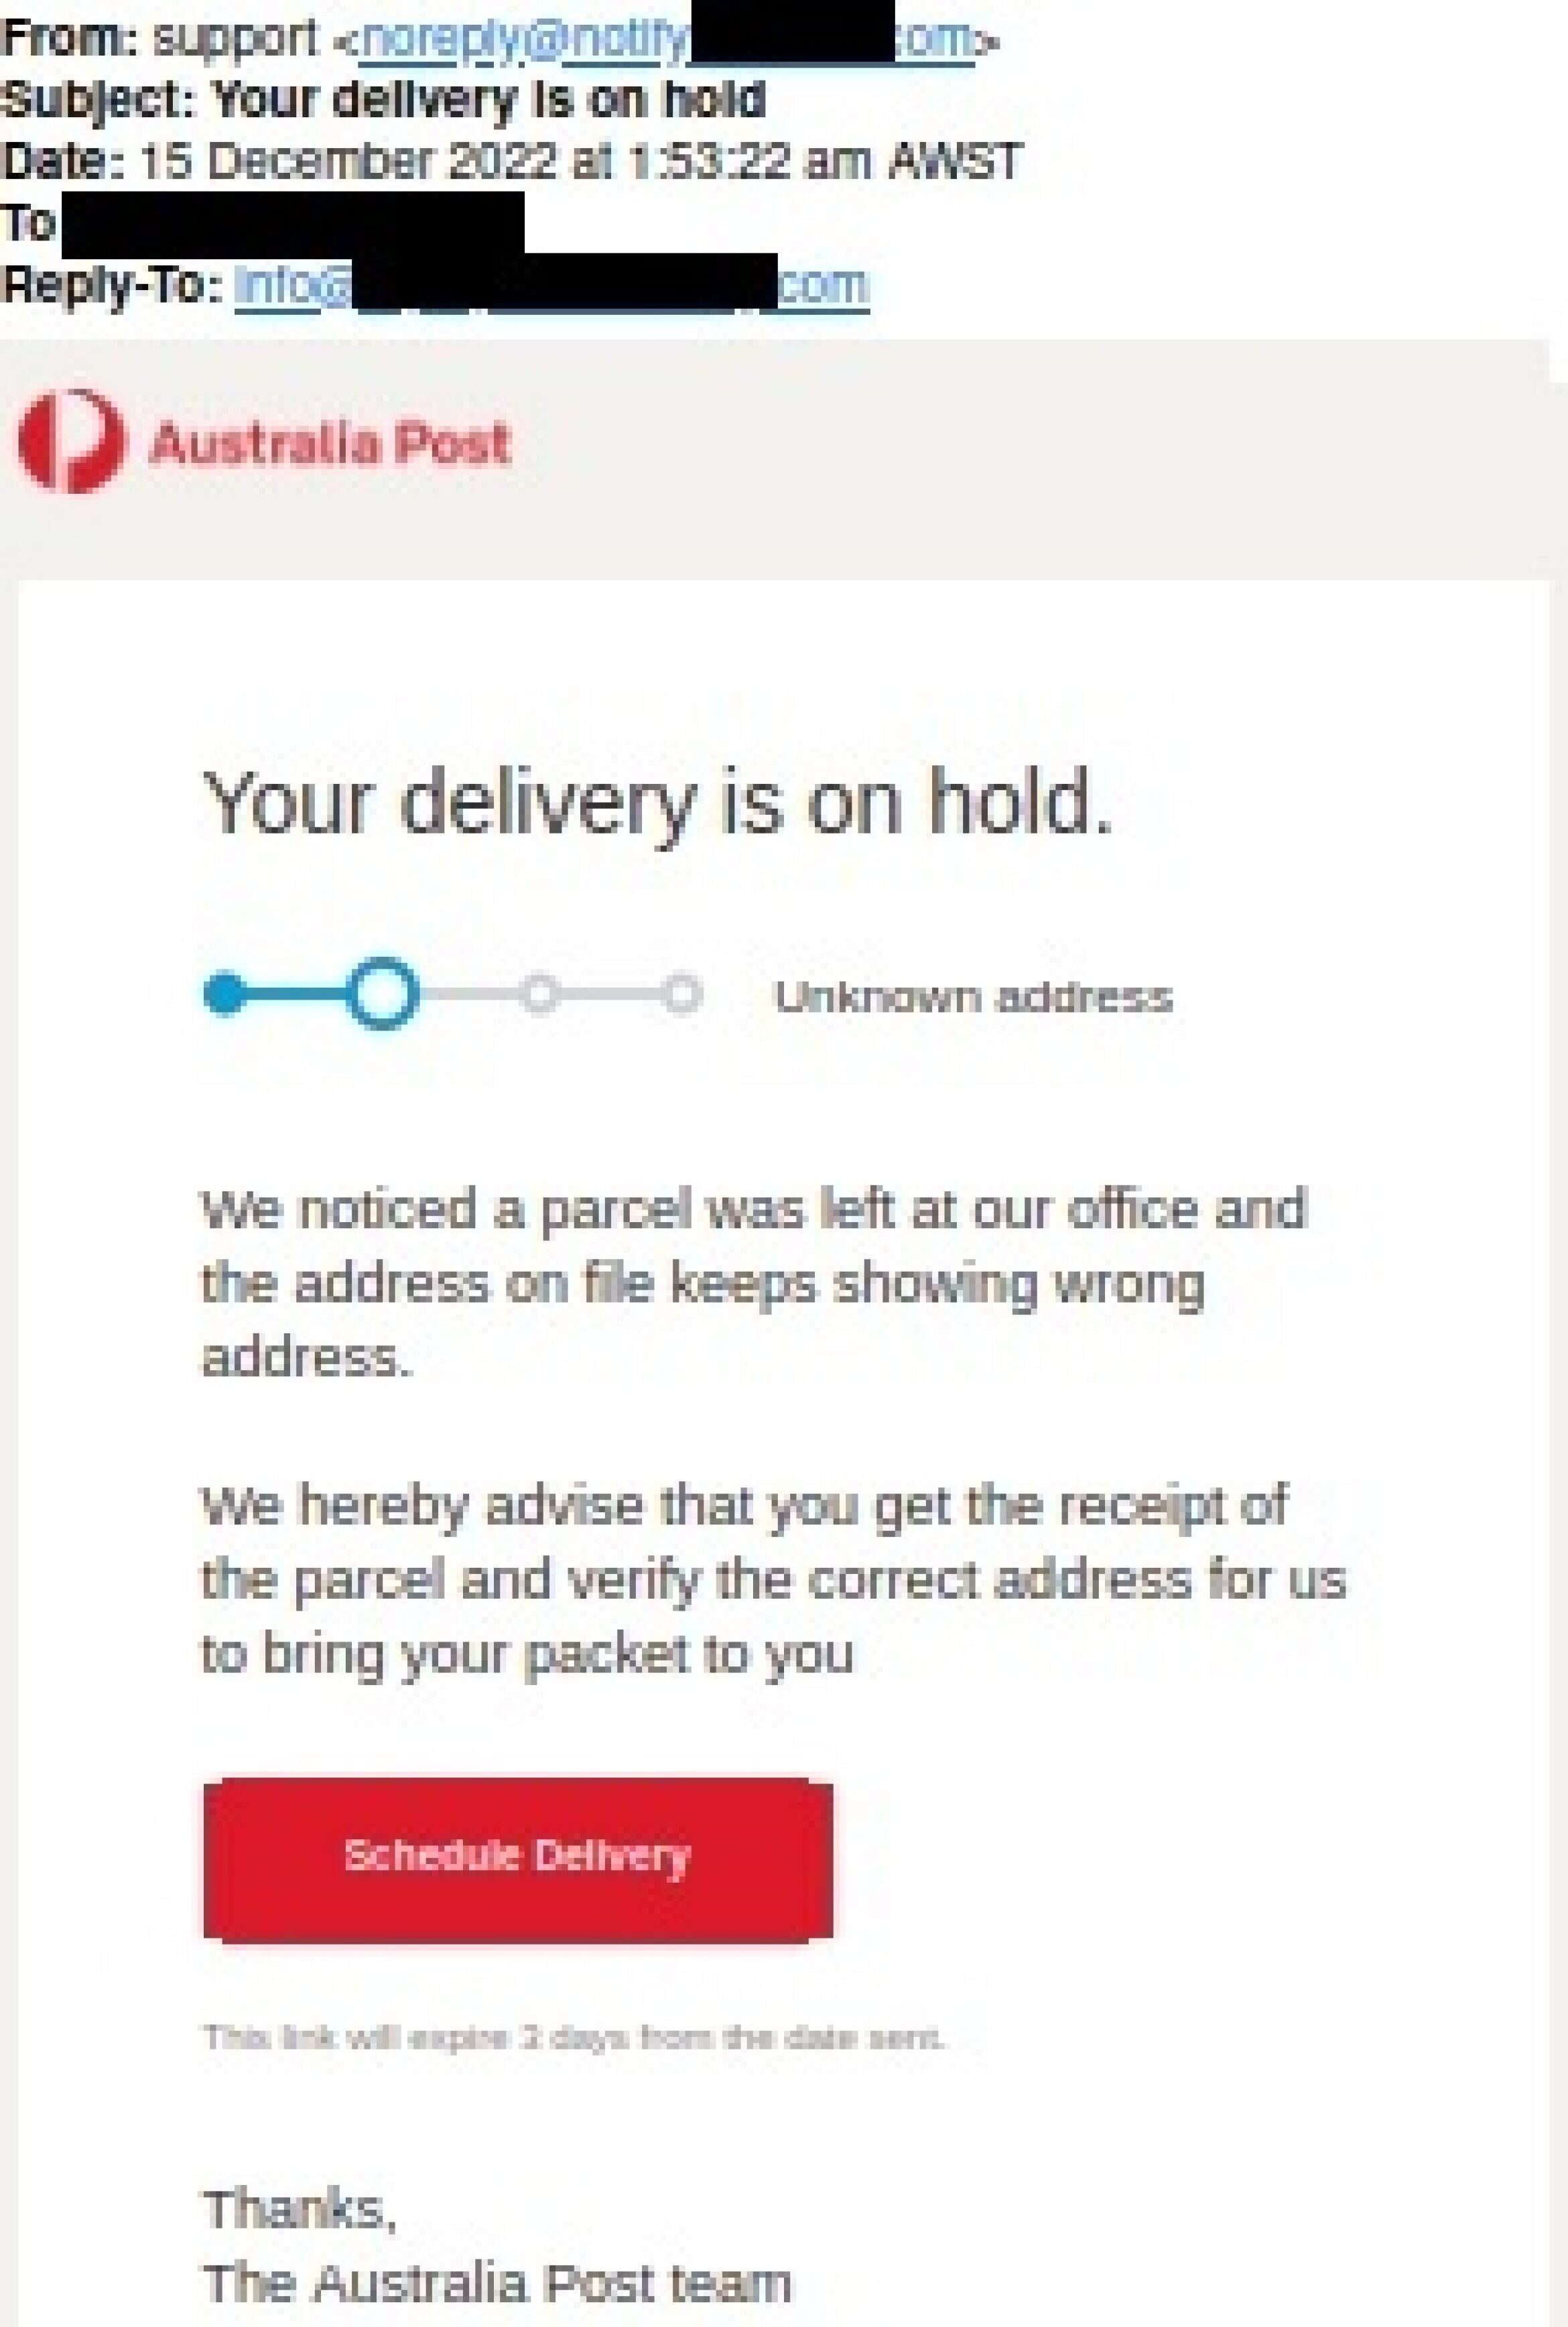 A screenshot of an email that reads "your delivery is on hold" with an Australia Post logo and a "schedule delivery" prompt